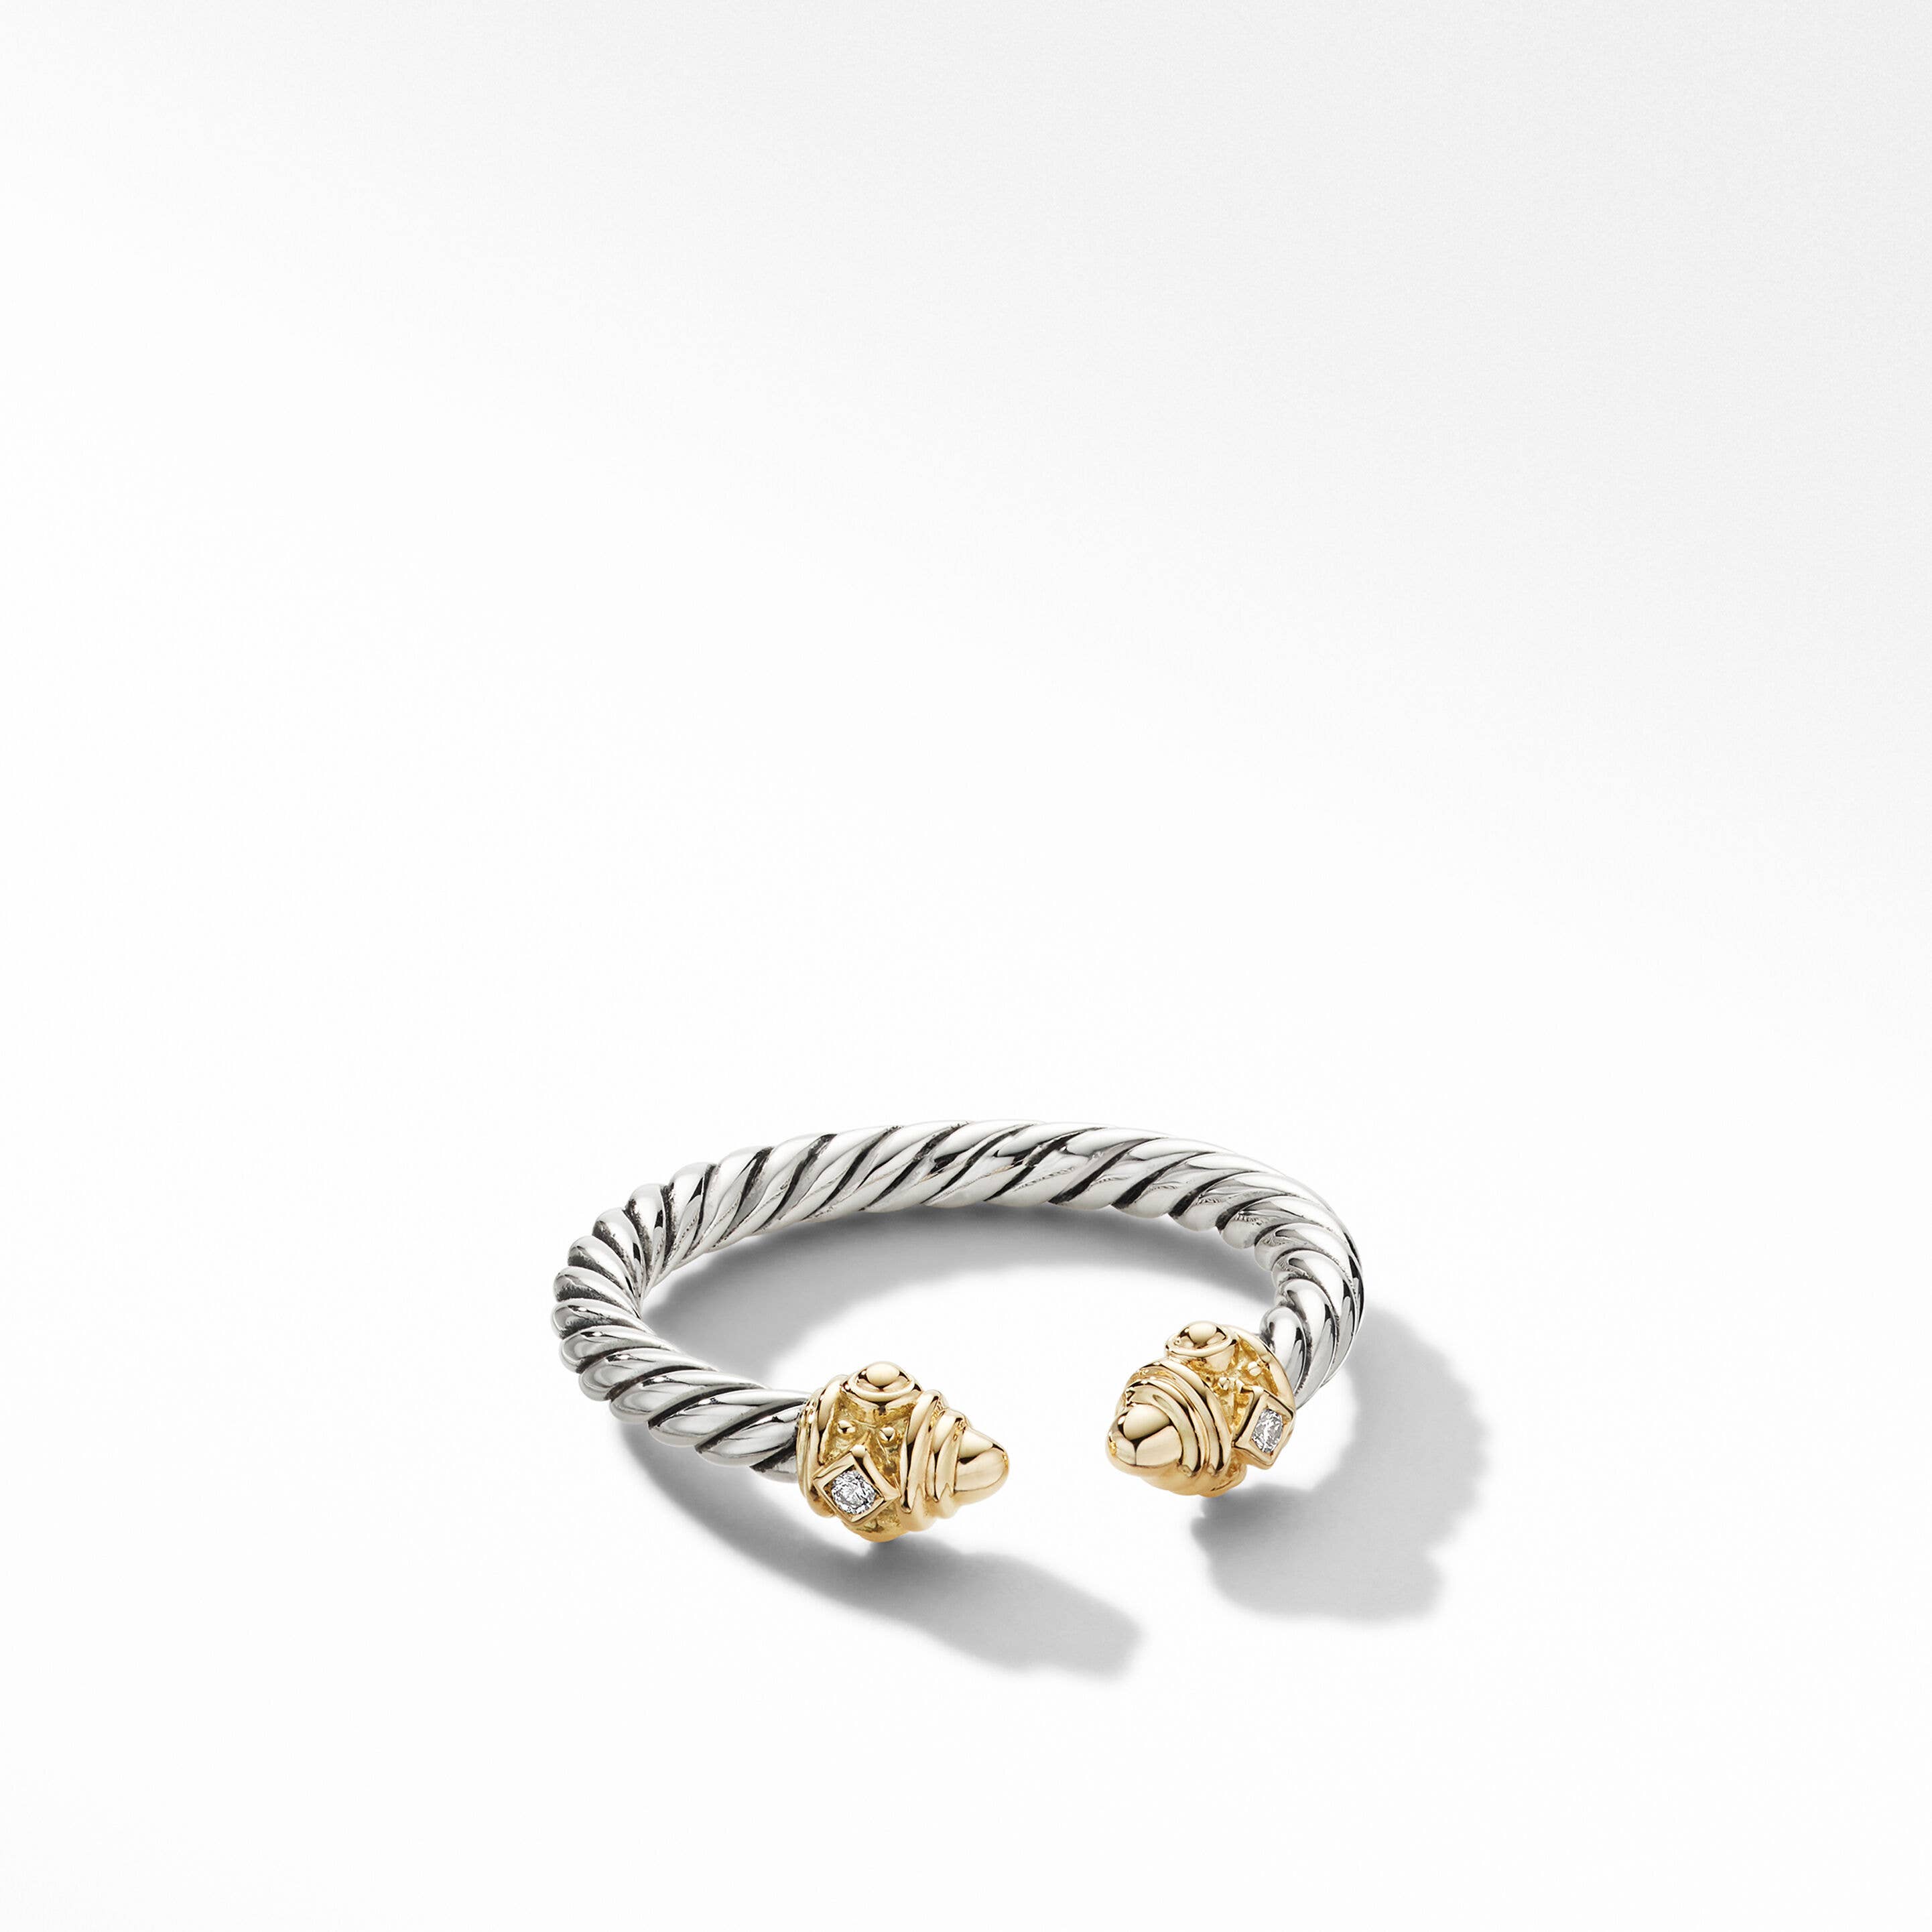 Renaissance® Ring in Sterling Silver with 14K Yellow Gold Domes and Diamonds